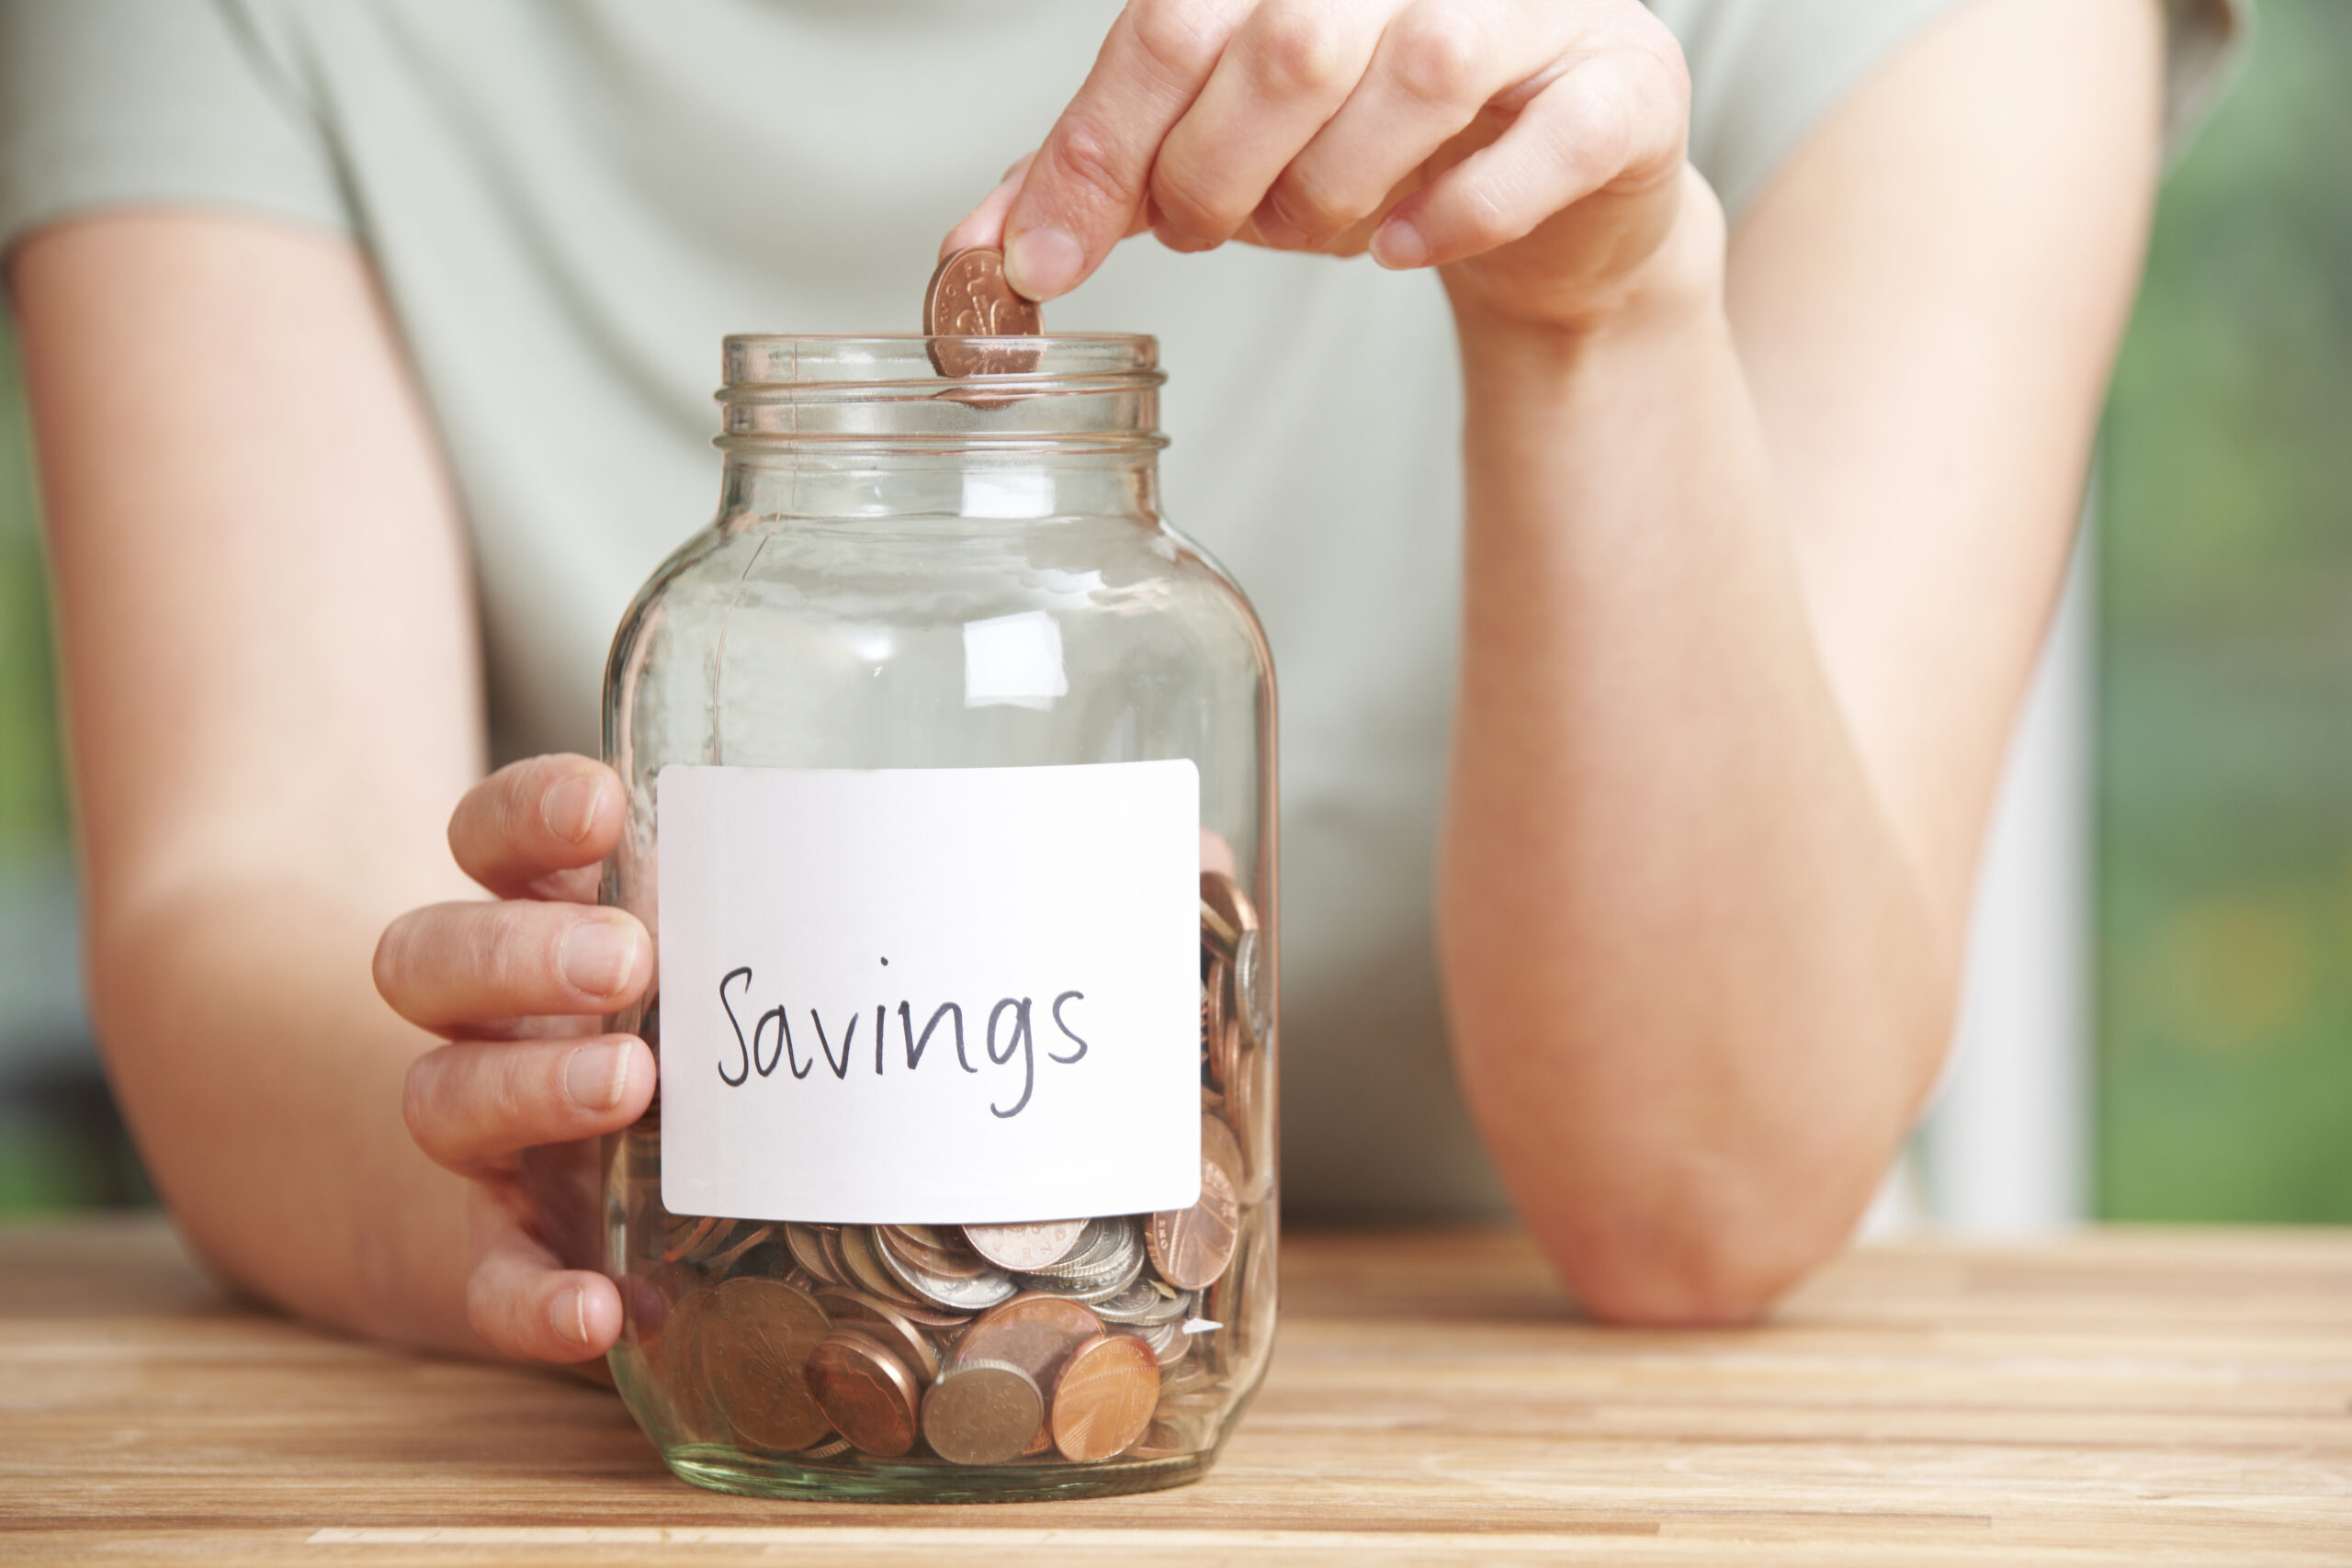 Tips to Save $5,000 in 6 Months